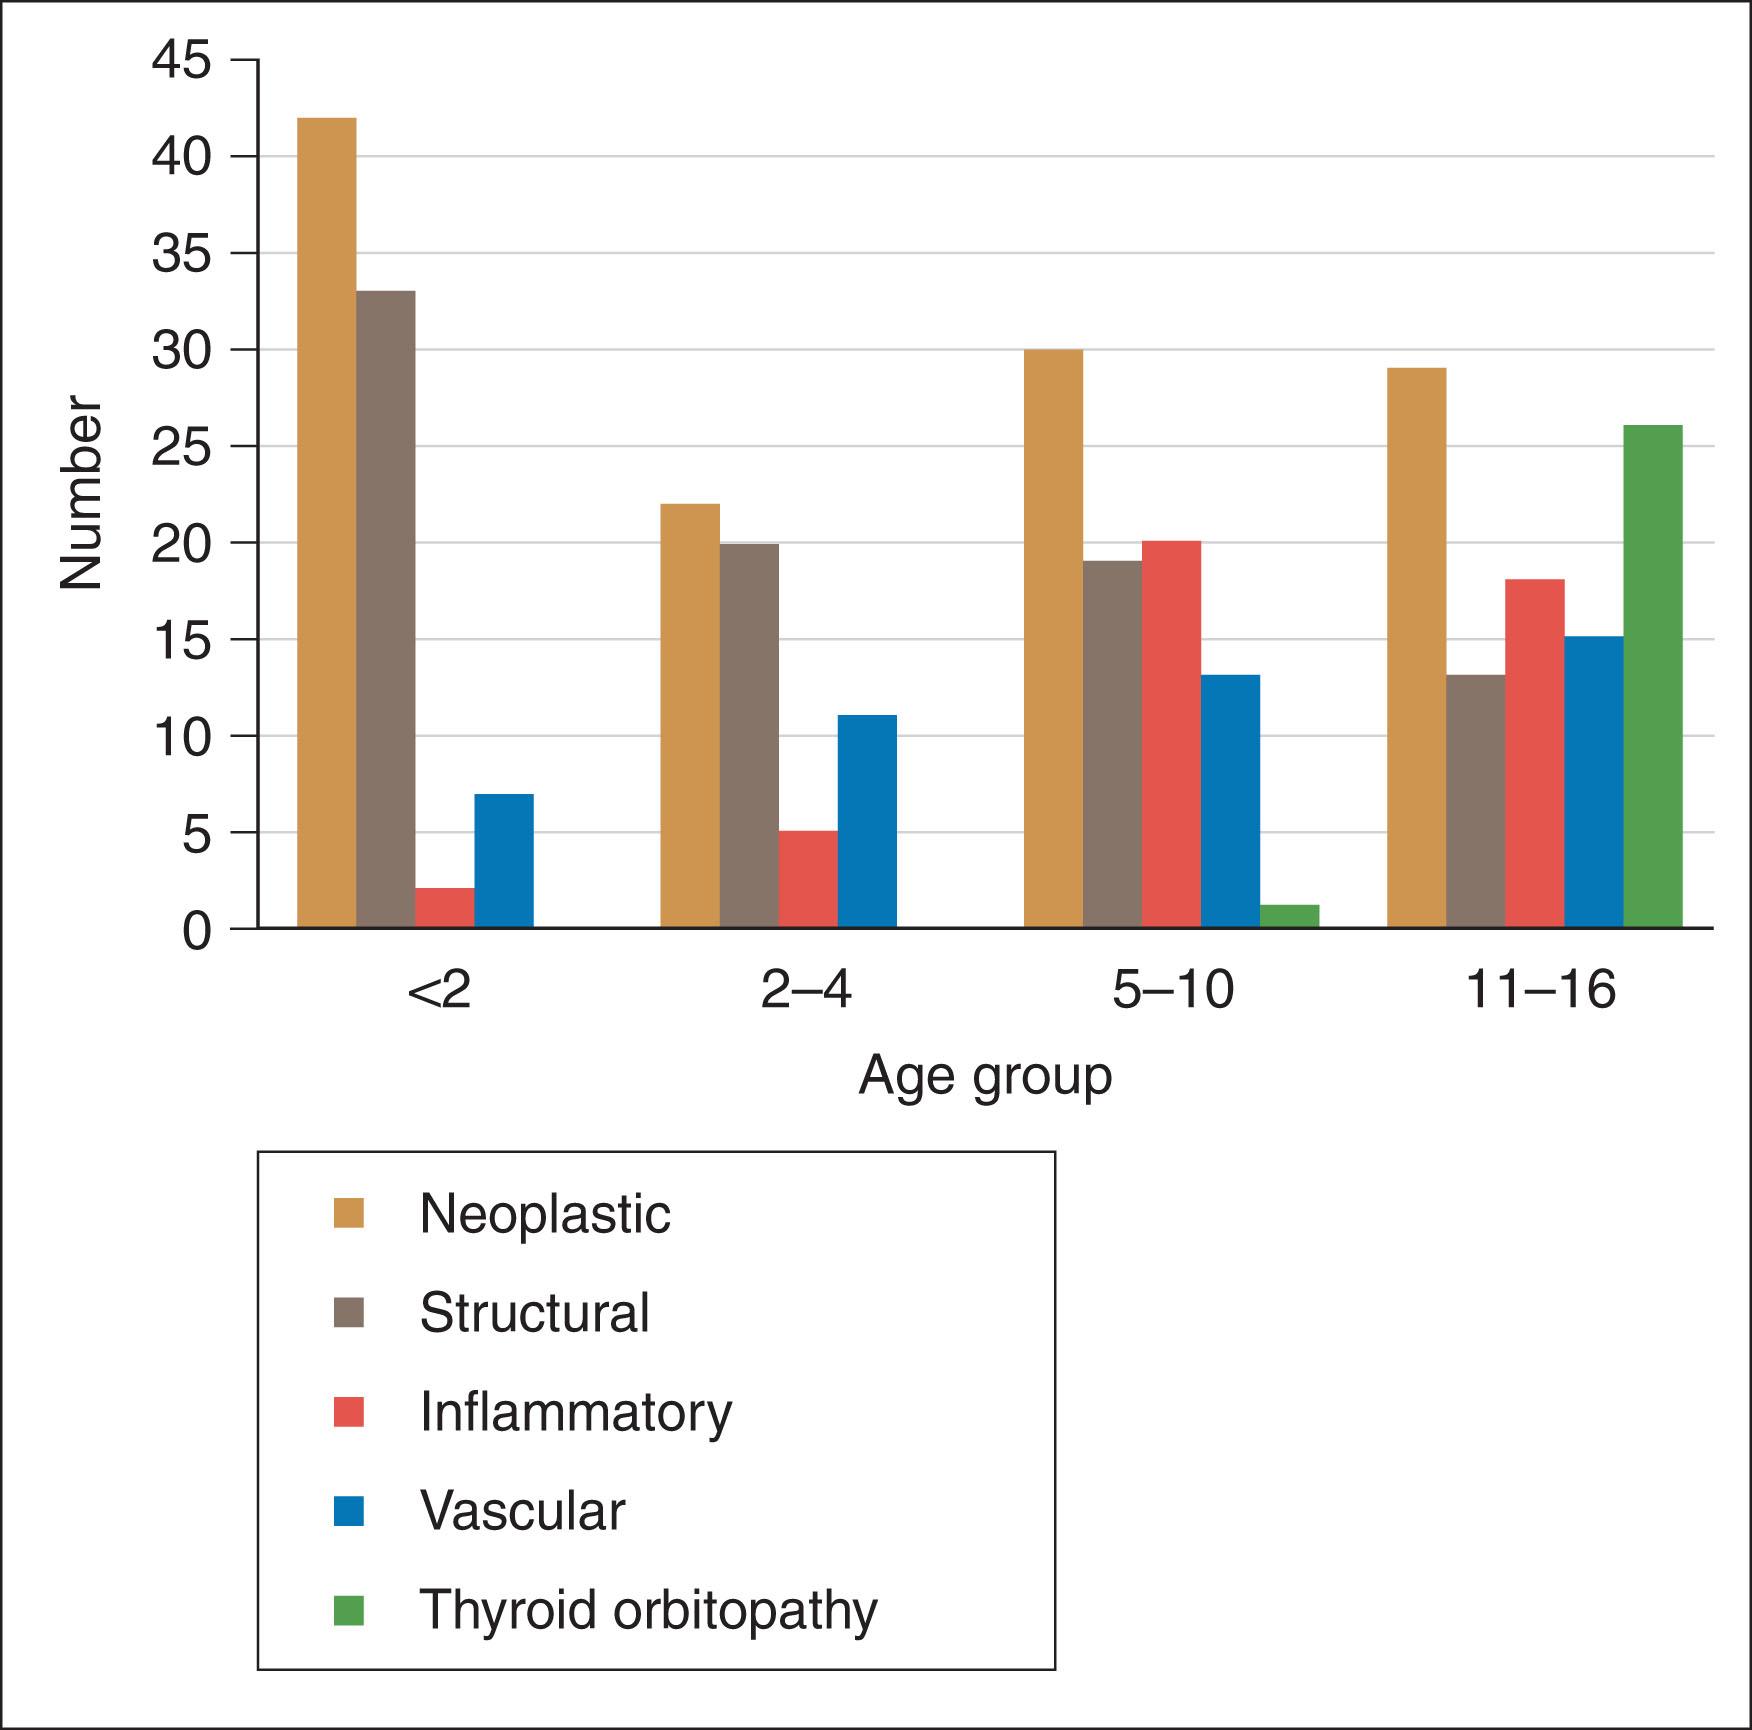 Fig. 19.3, Distribution of orbital disease by age group in patients less than 17 years of age.